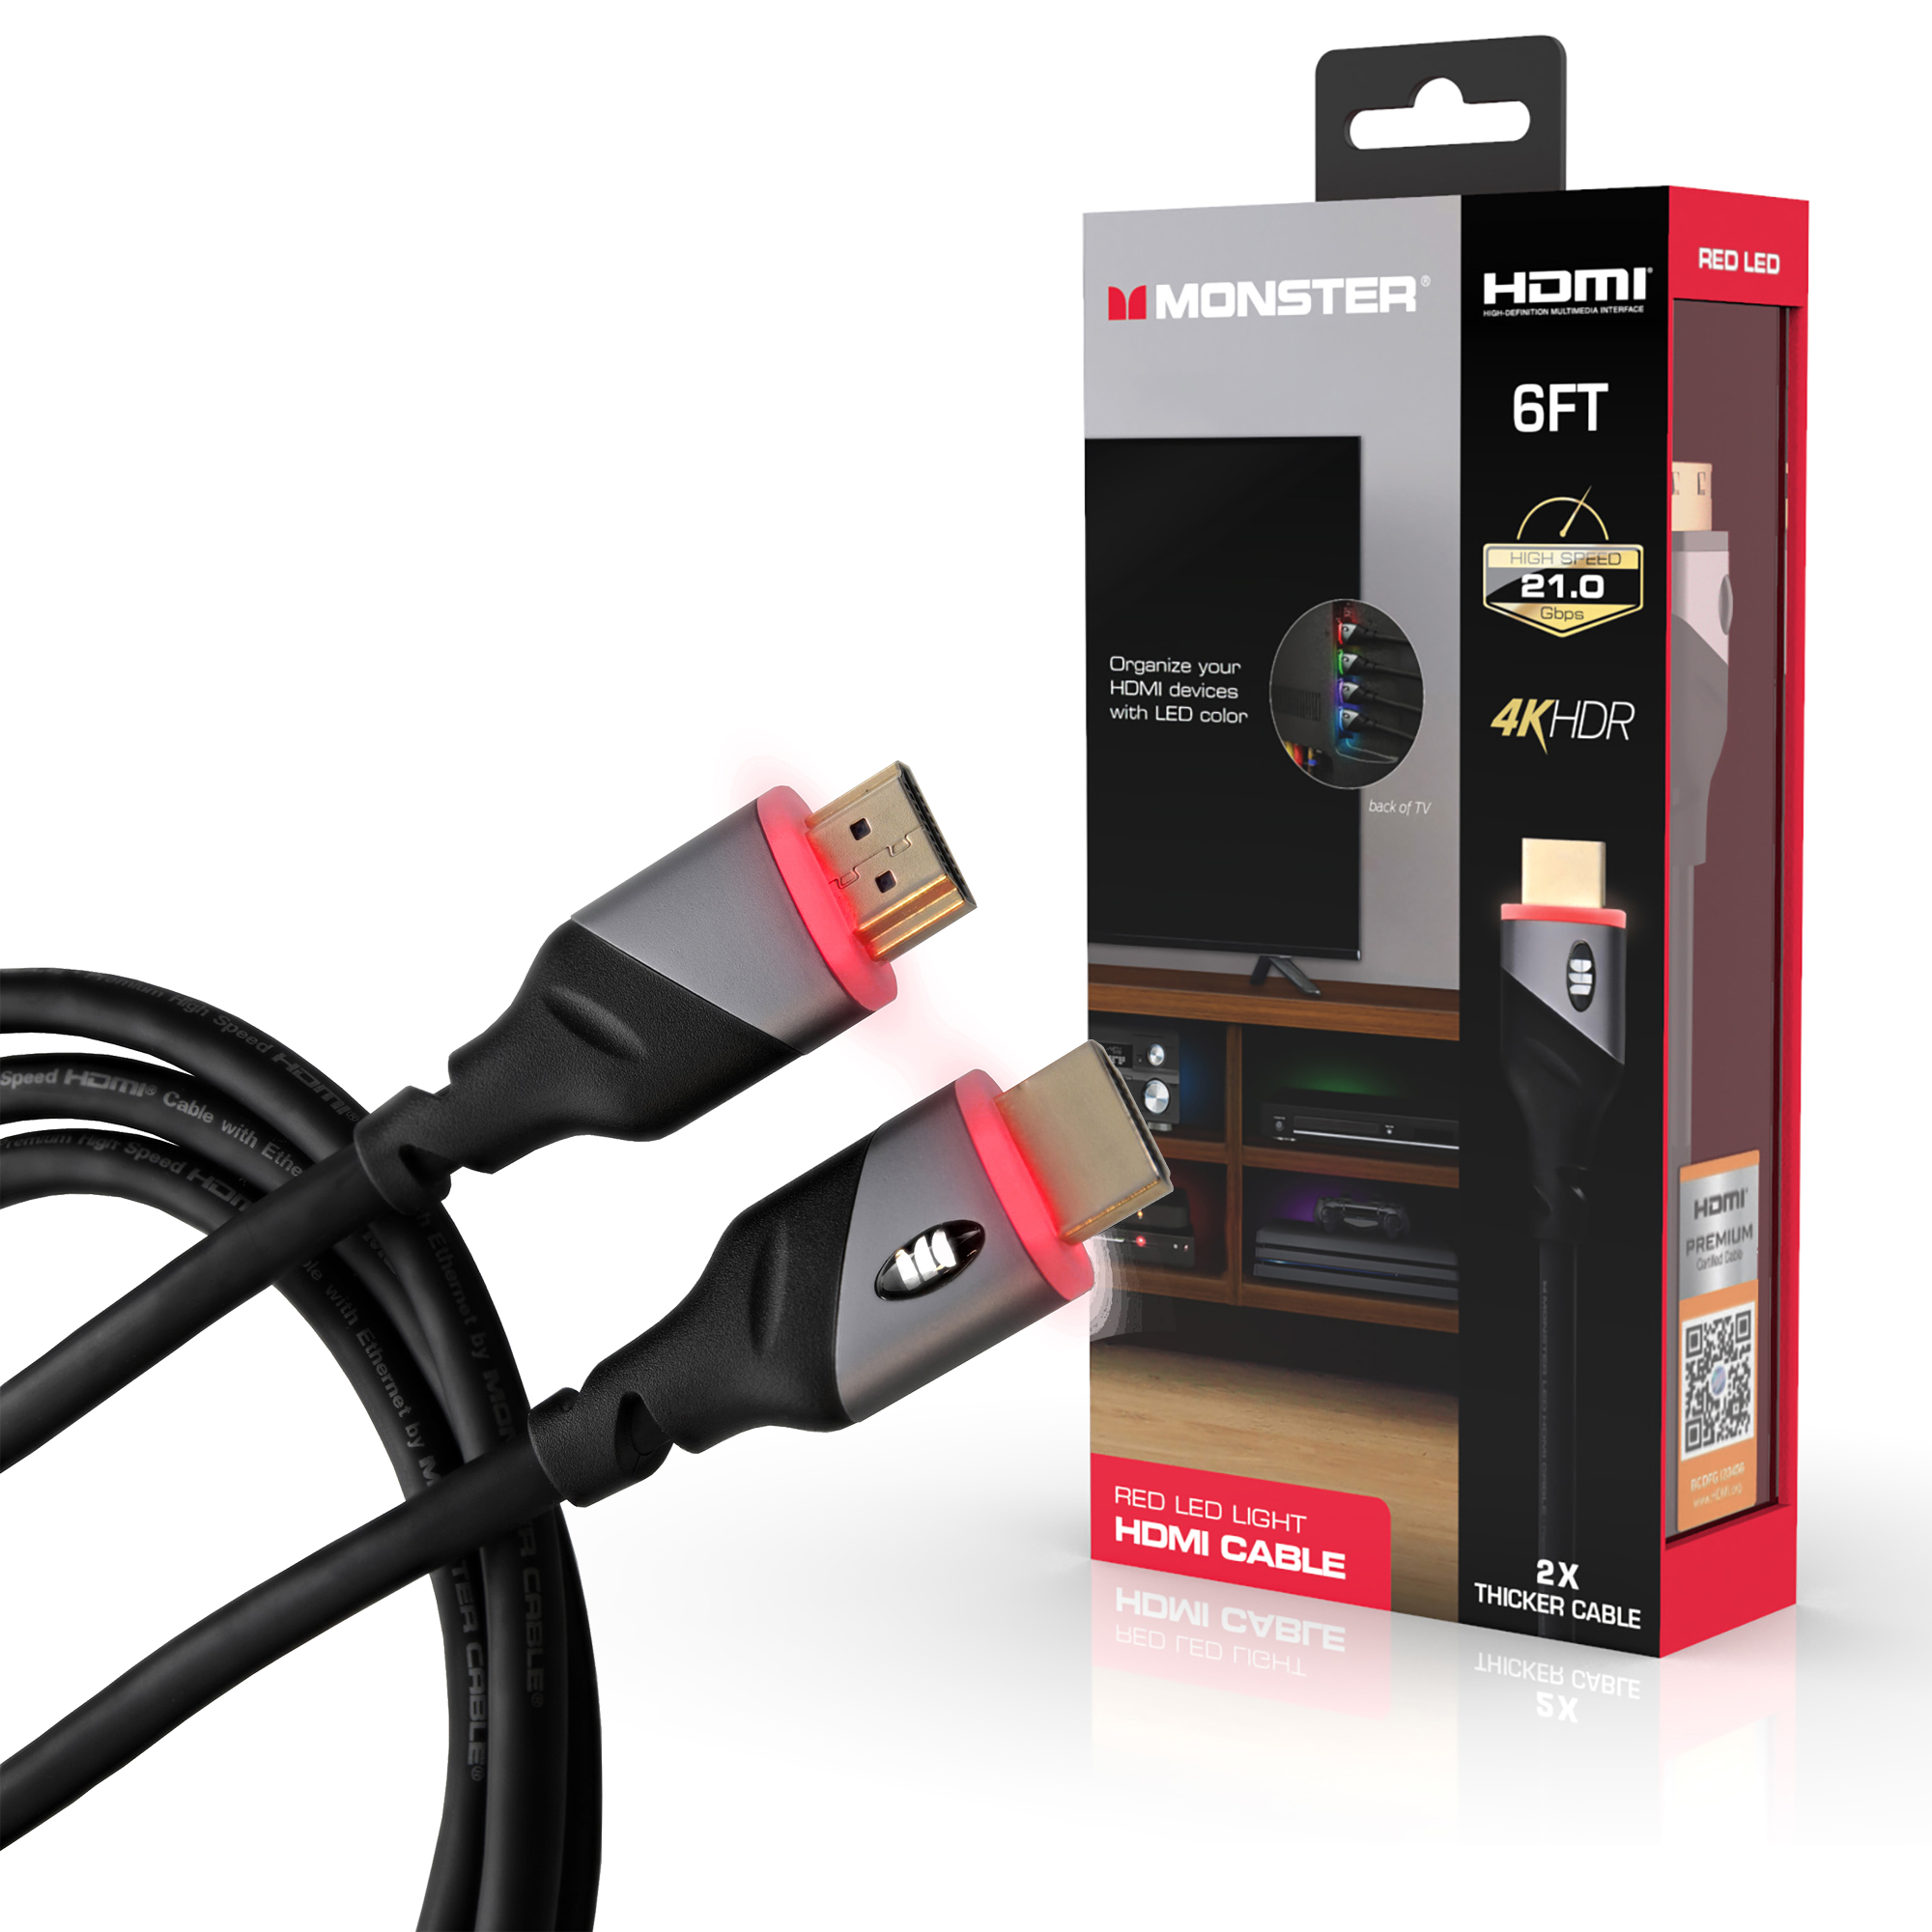 Built-in Red Light 6 ft High Speed 4K HDR HDMI Cable, Great for Gaming, Video, Computer - Monster Illuminessence